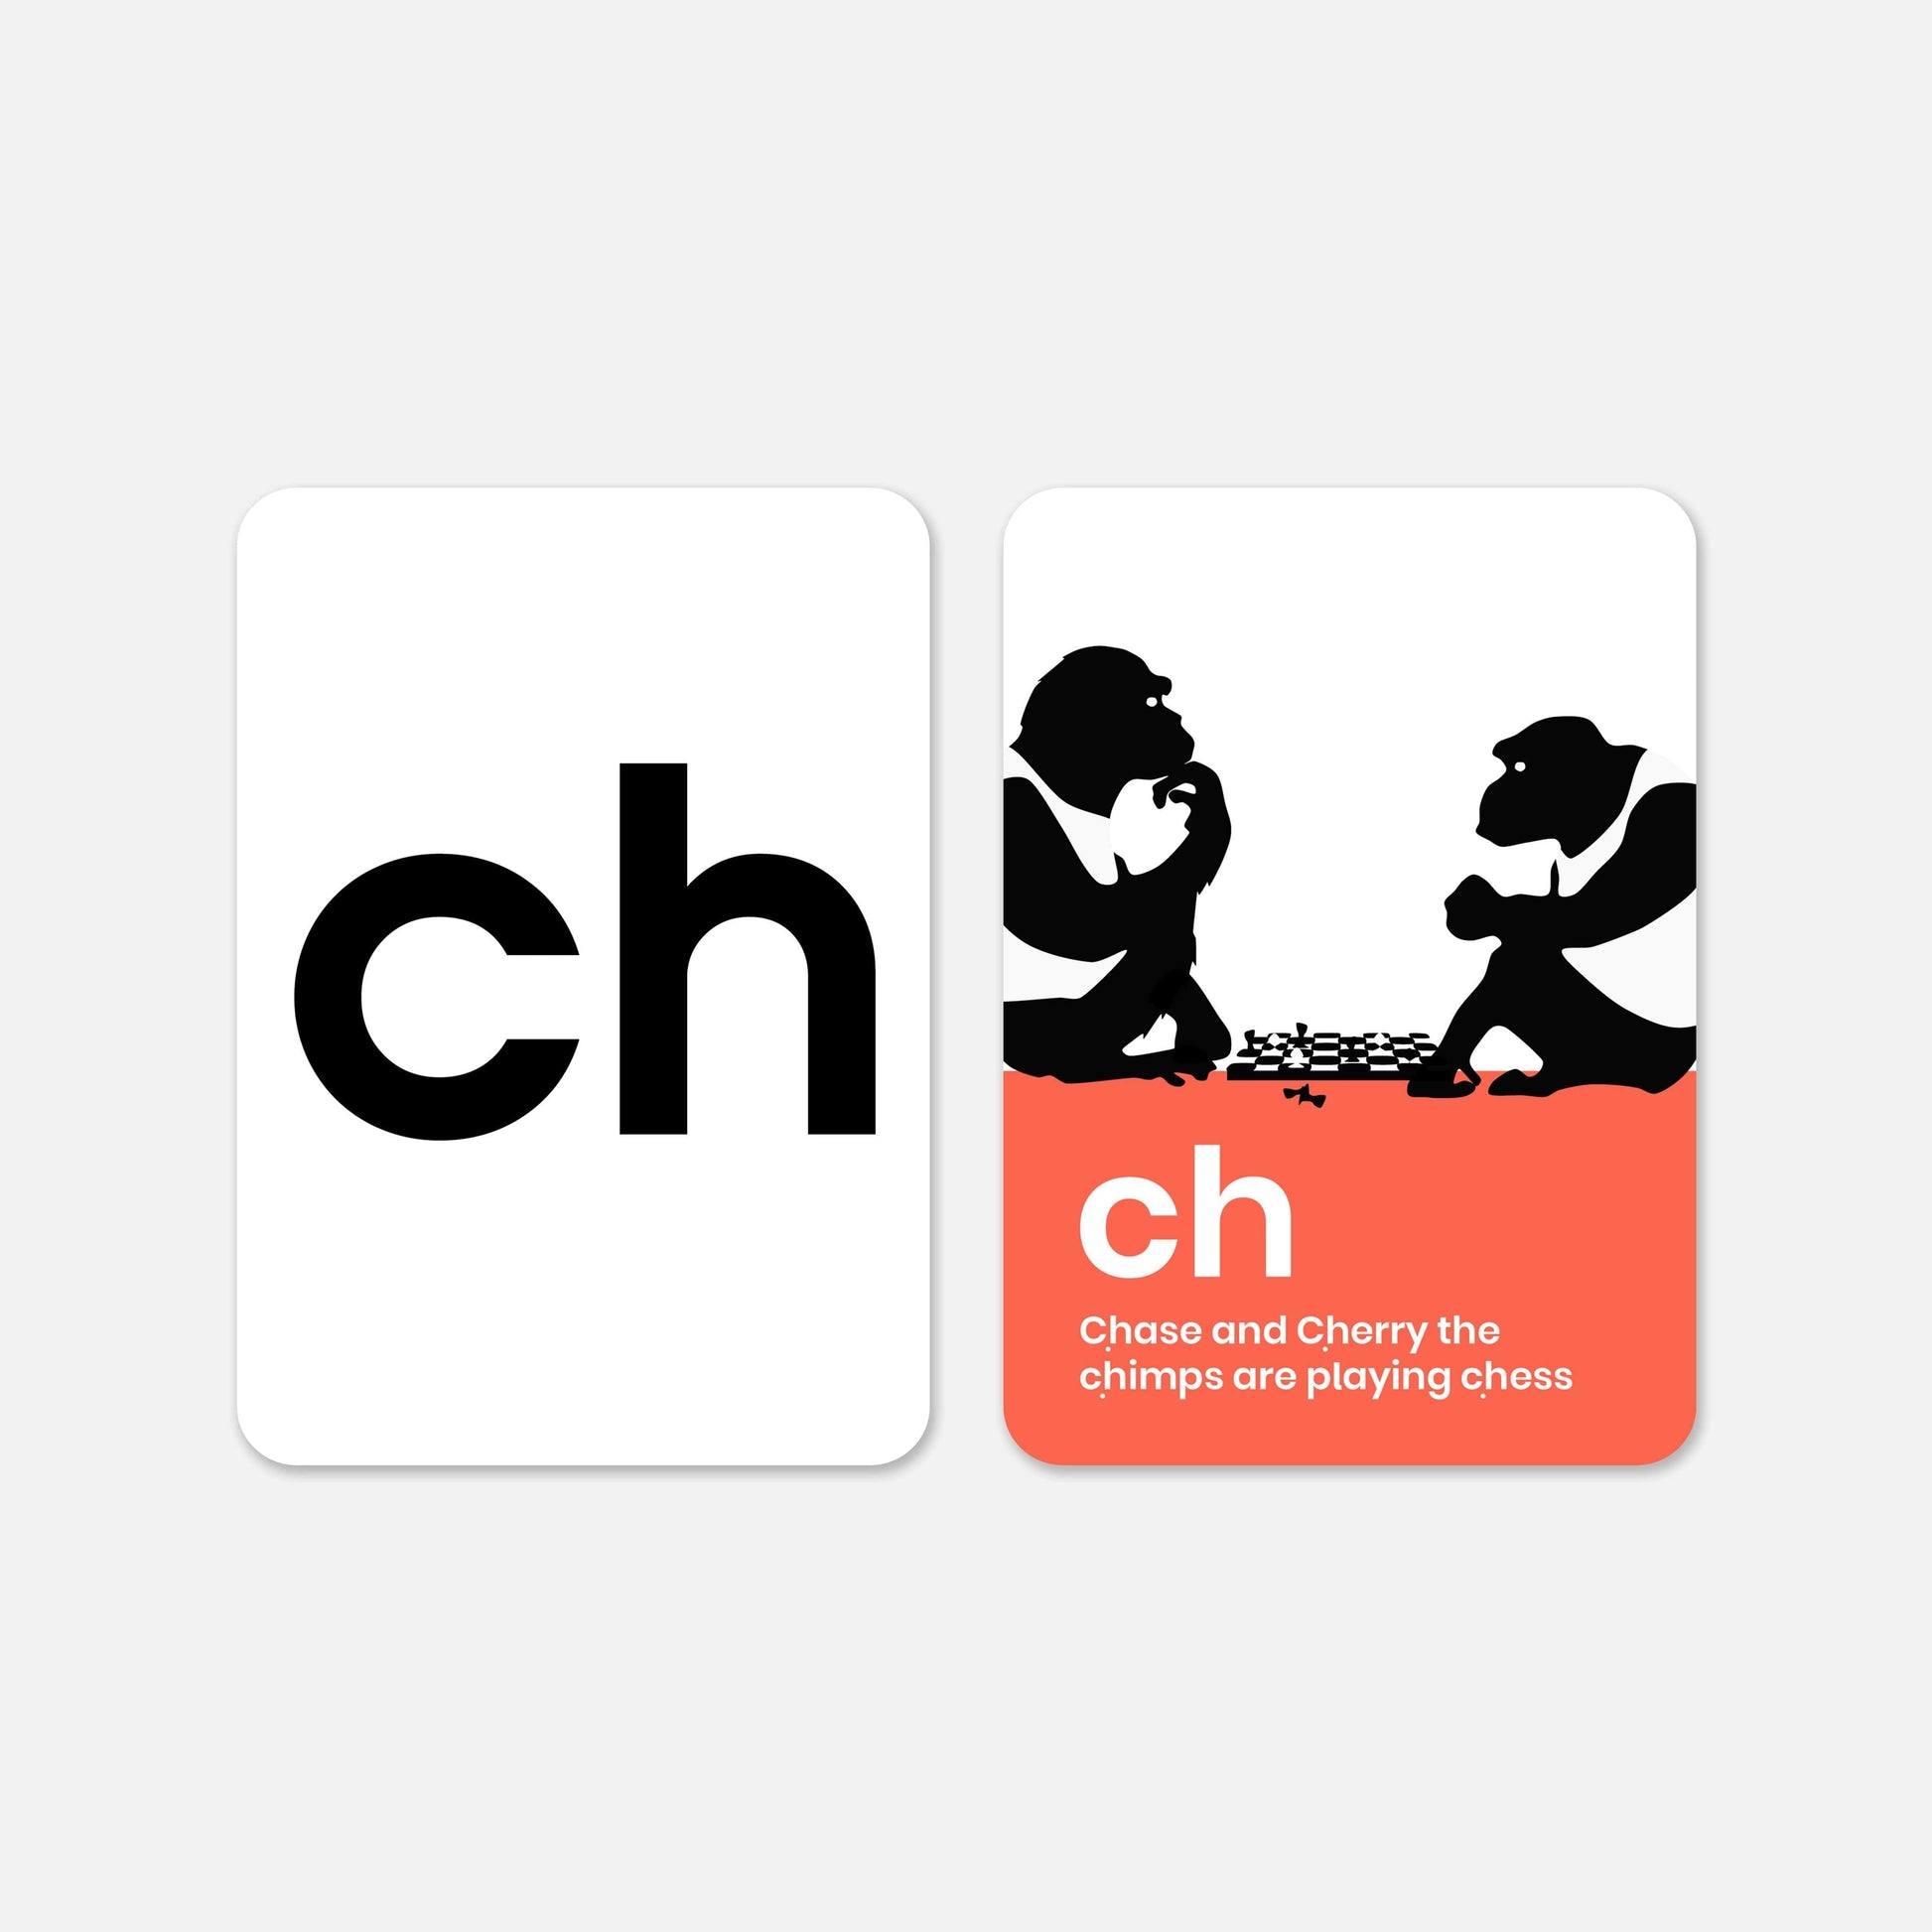 happy little doers LEARN PHONICS FLASHCARDS